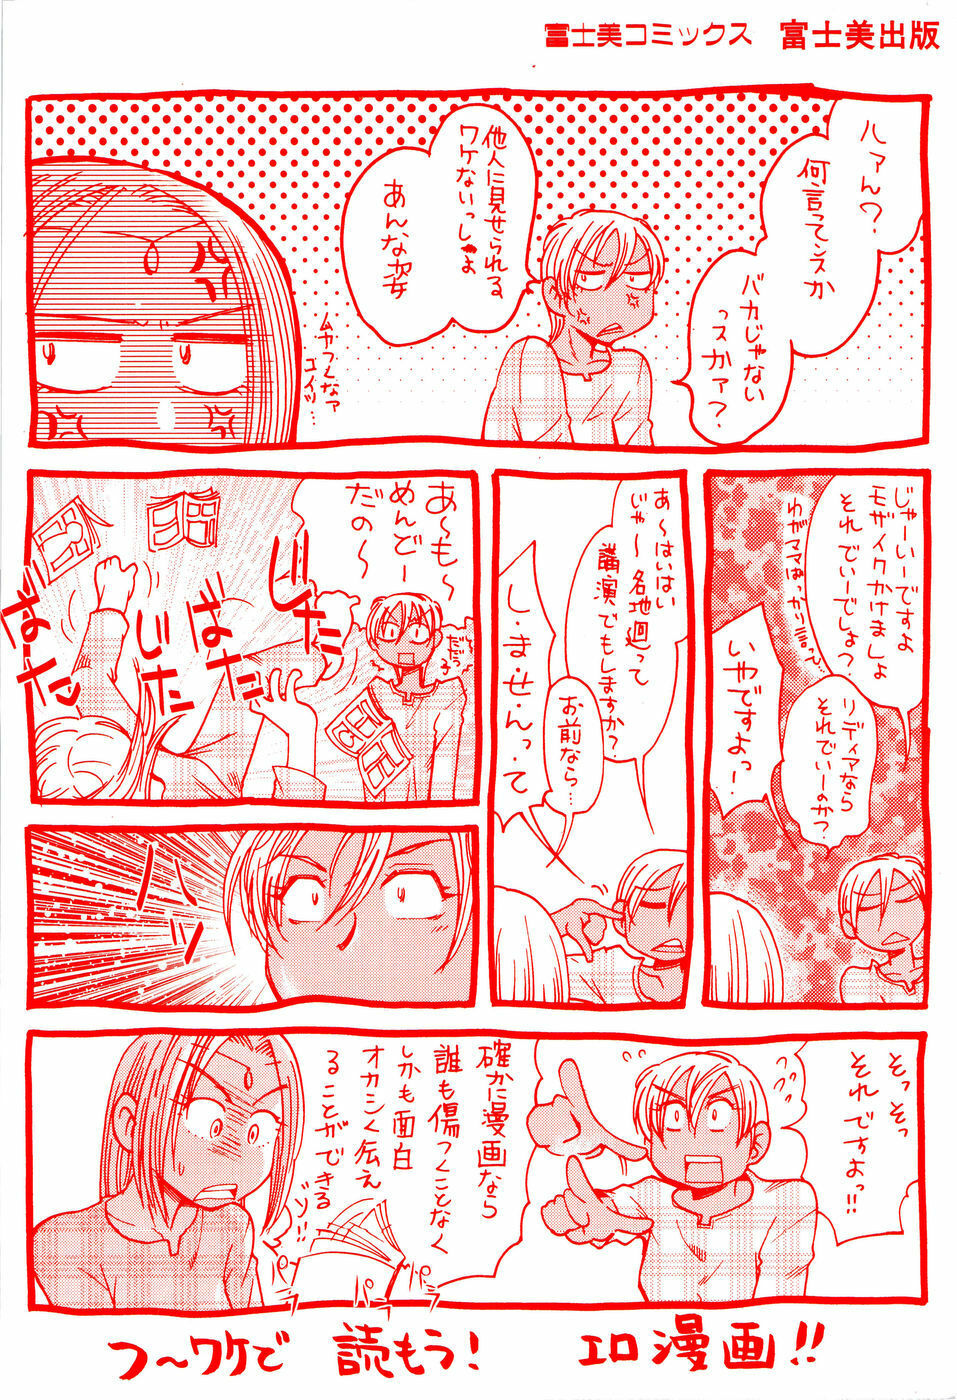 [Ono Kenuji] Love Dere - It is crazy about love. page 6 full